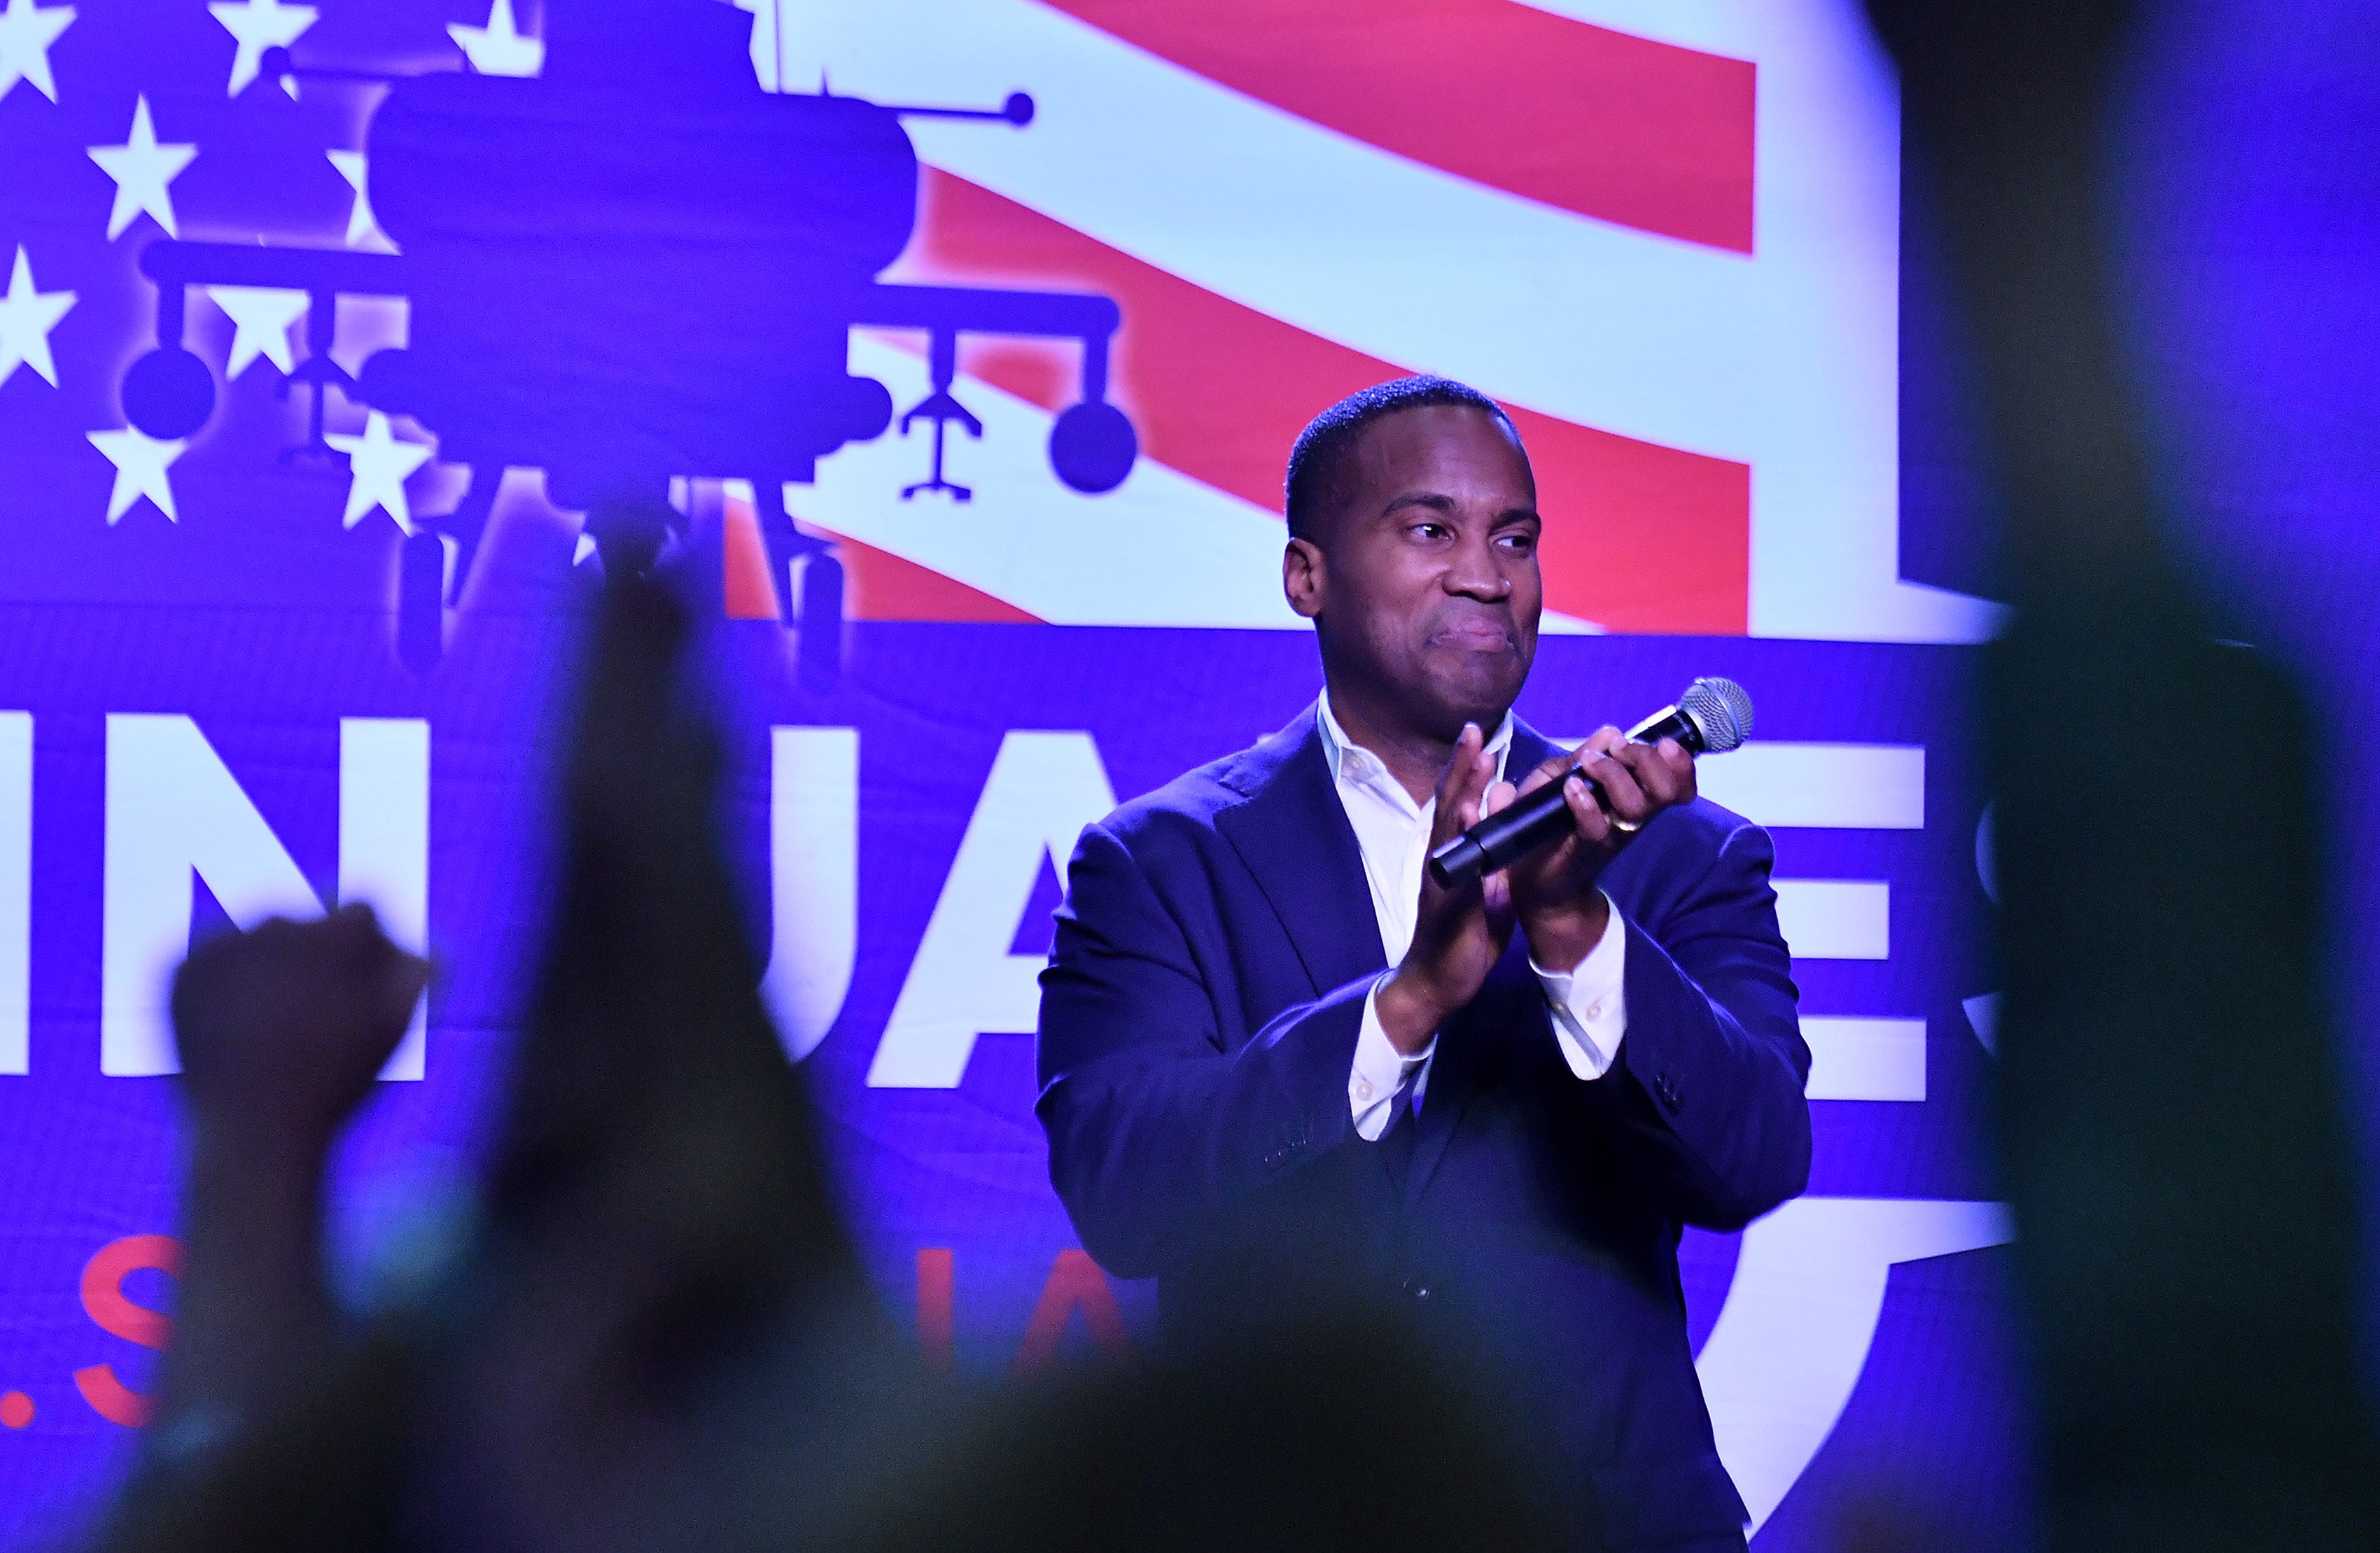 John James applauds his supporters during the rally.